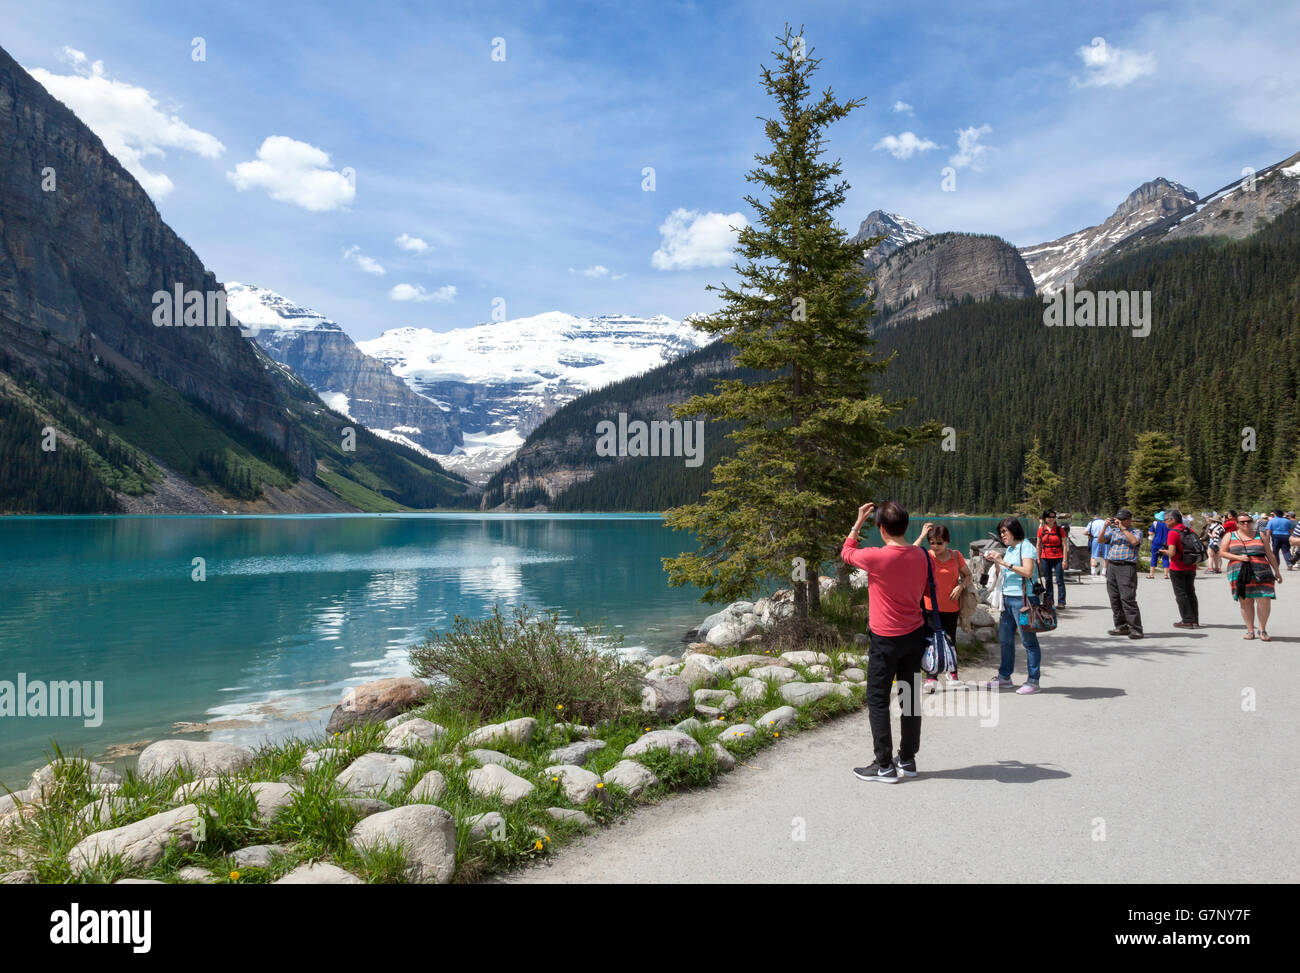 Tourists pause to take in the natural beauty of Lake Louise in Alberta Canada Stock Photo